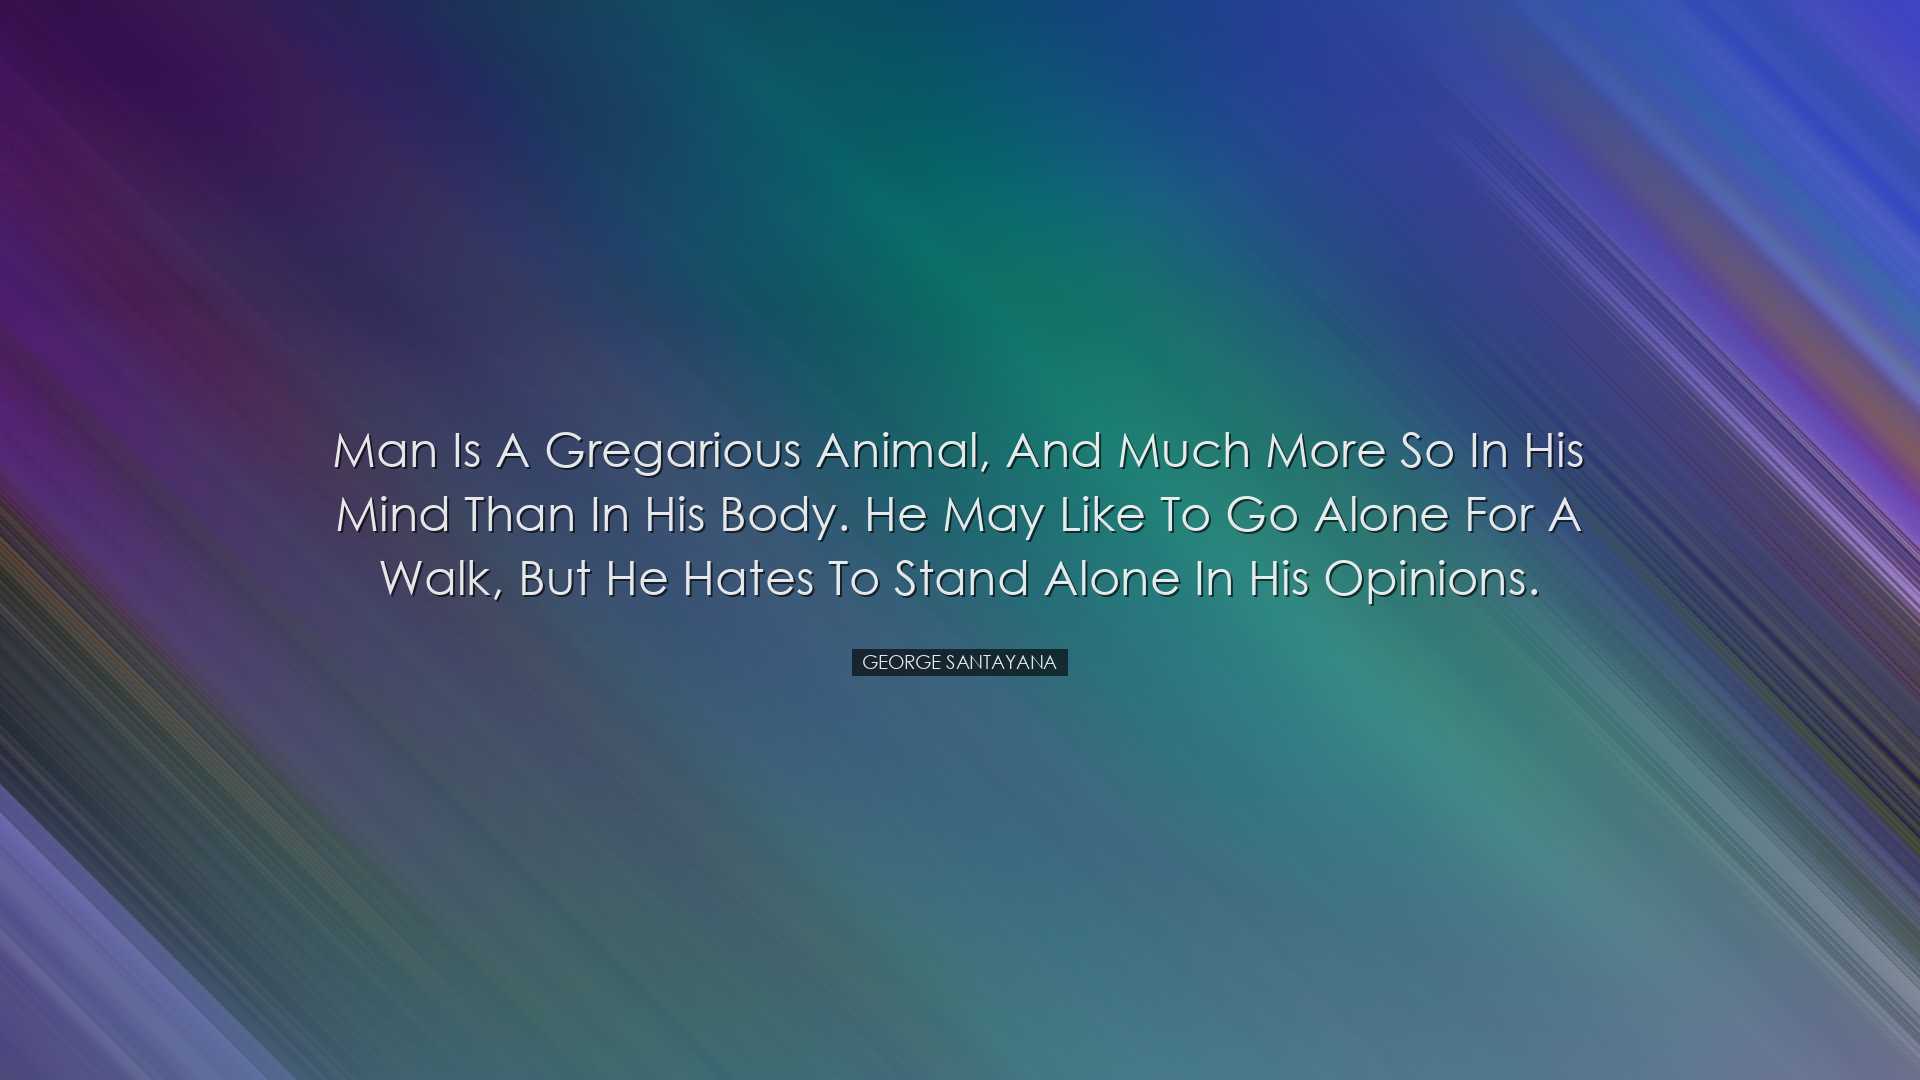 Man is a gregarious animal, and much more so in his mind than in h